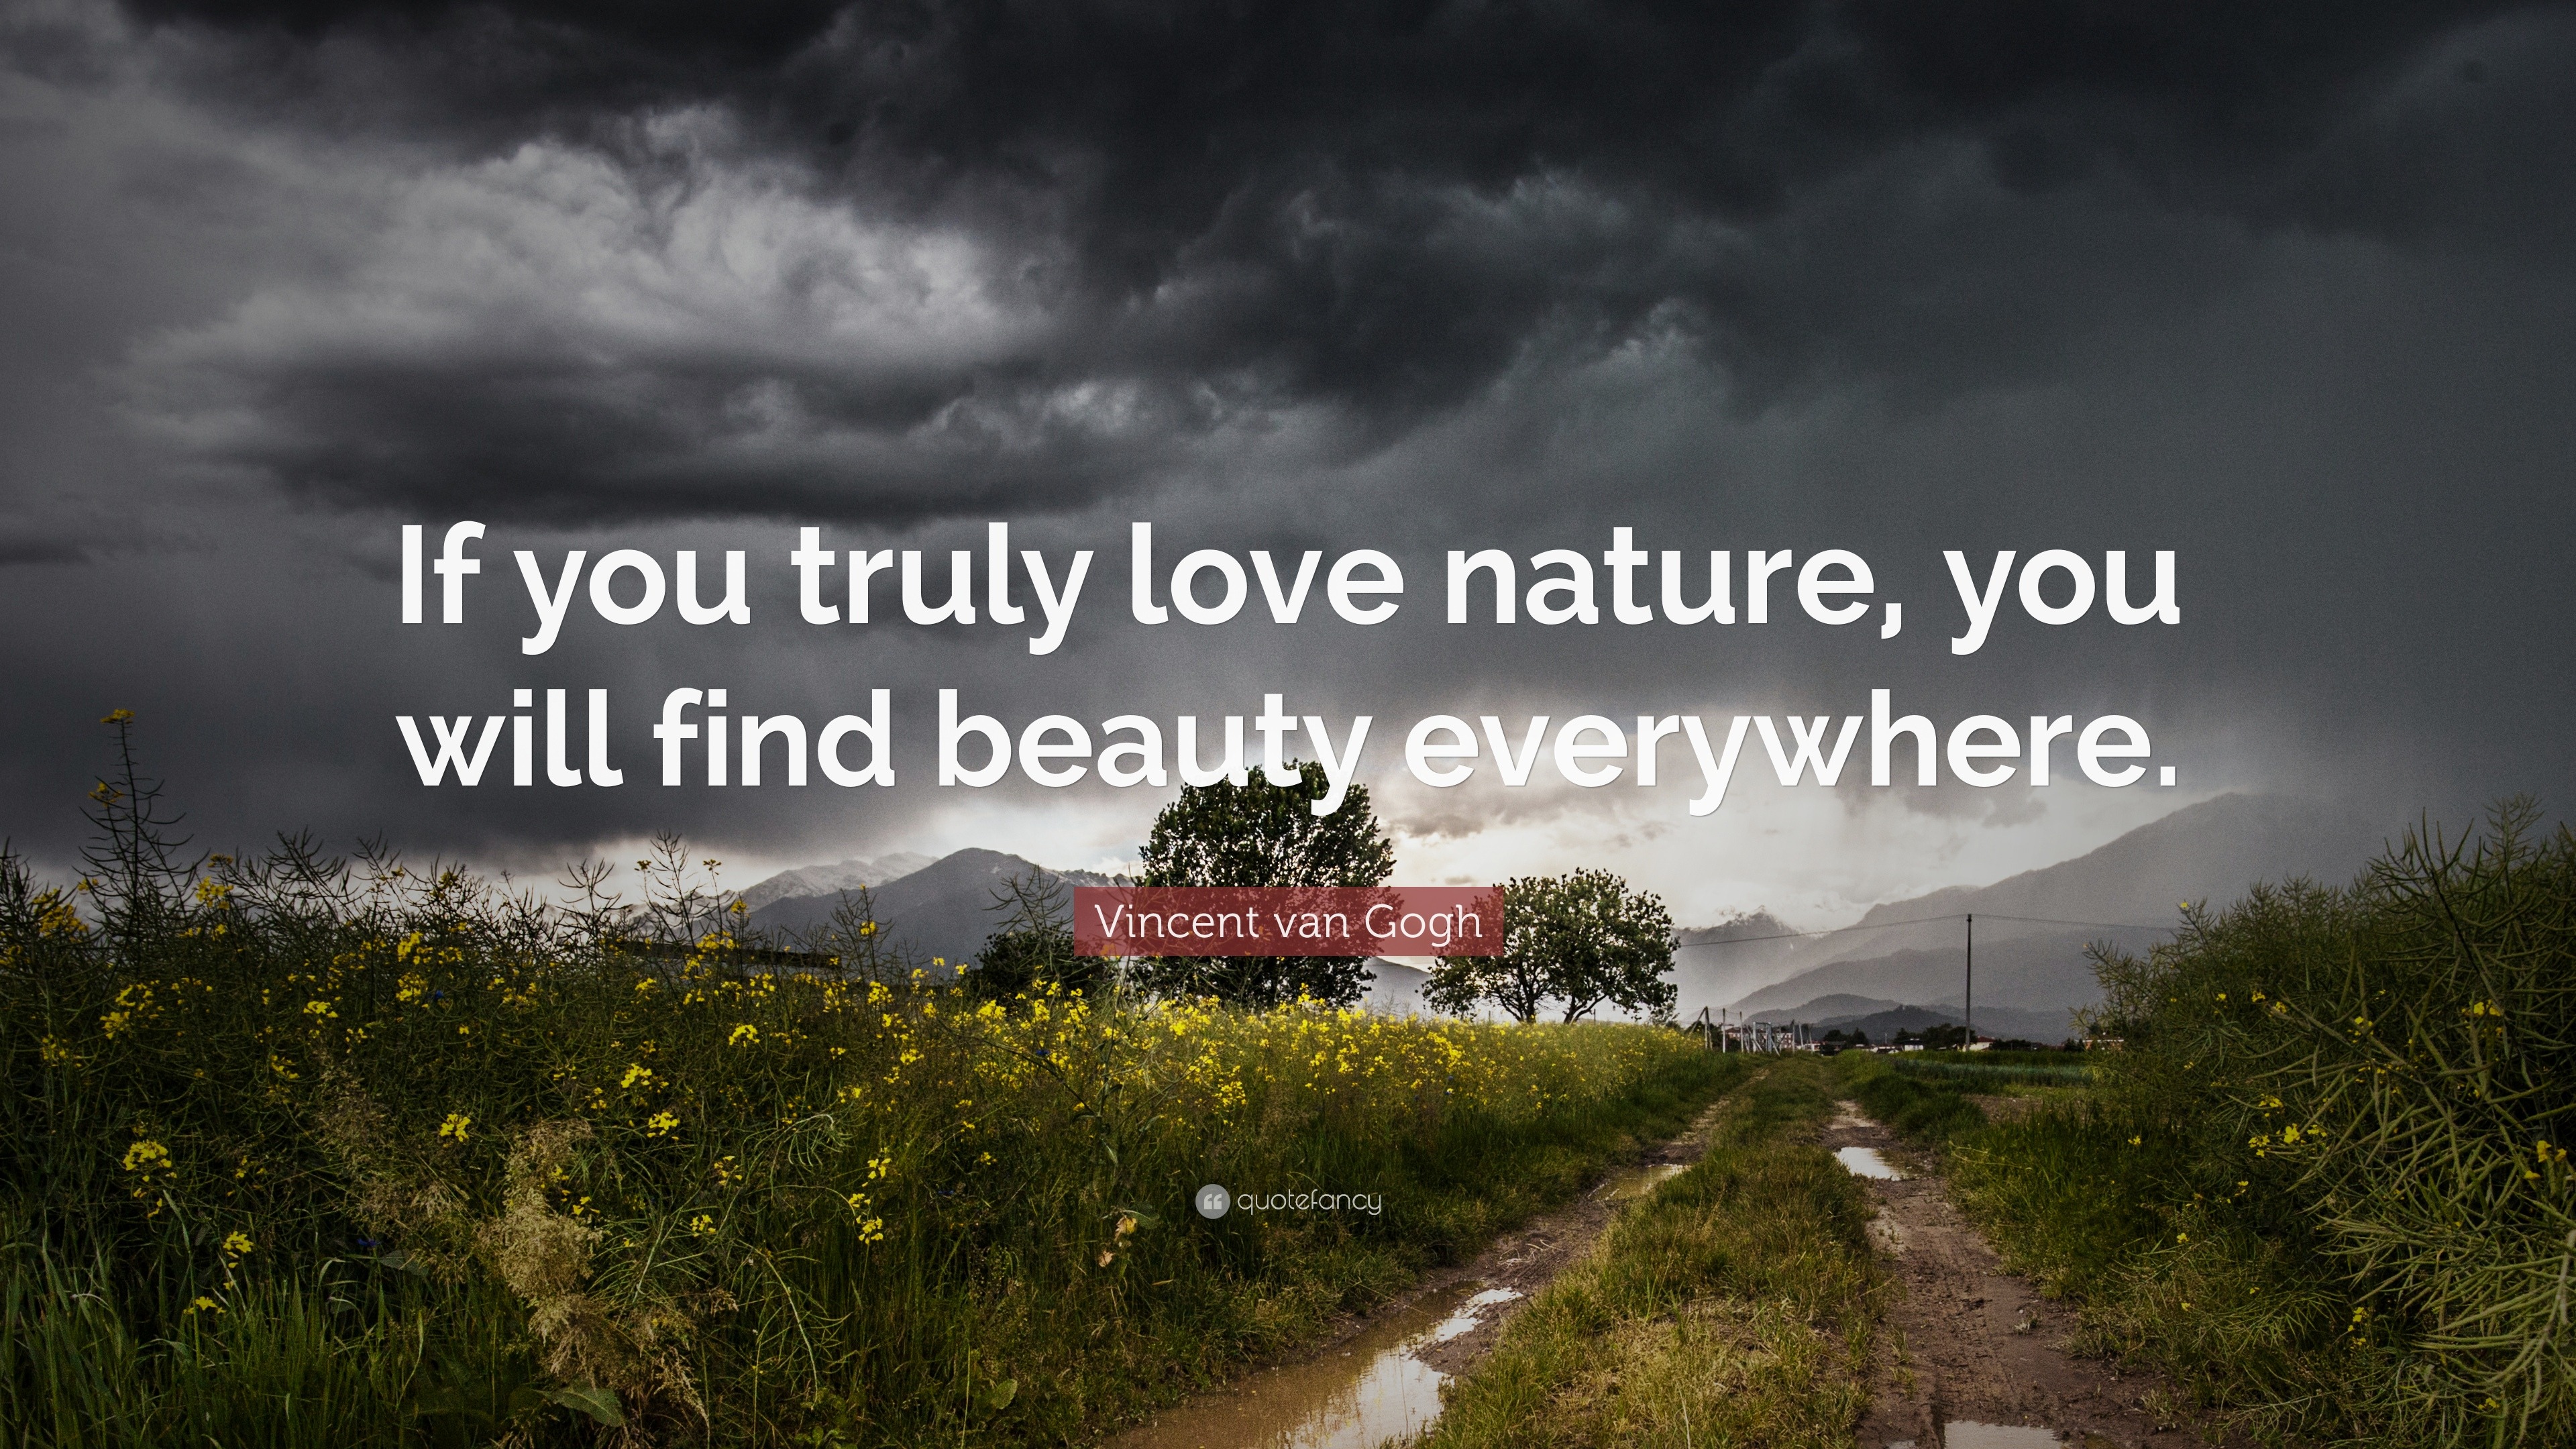 Quotes About Our Nature